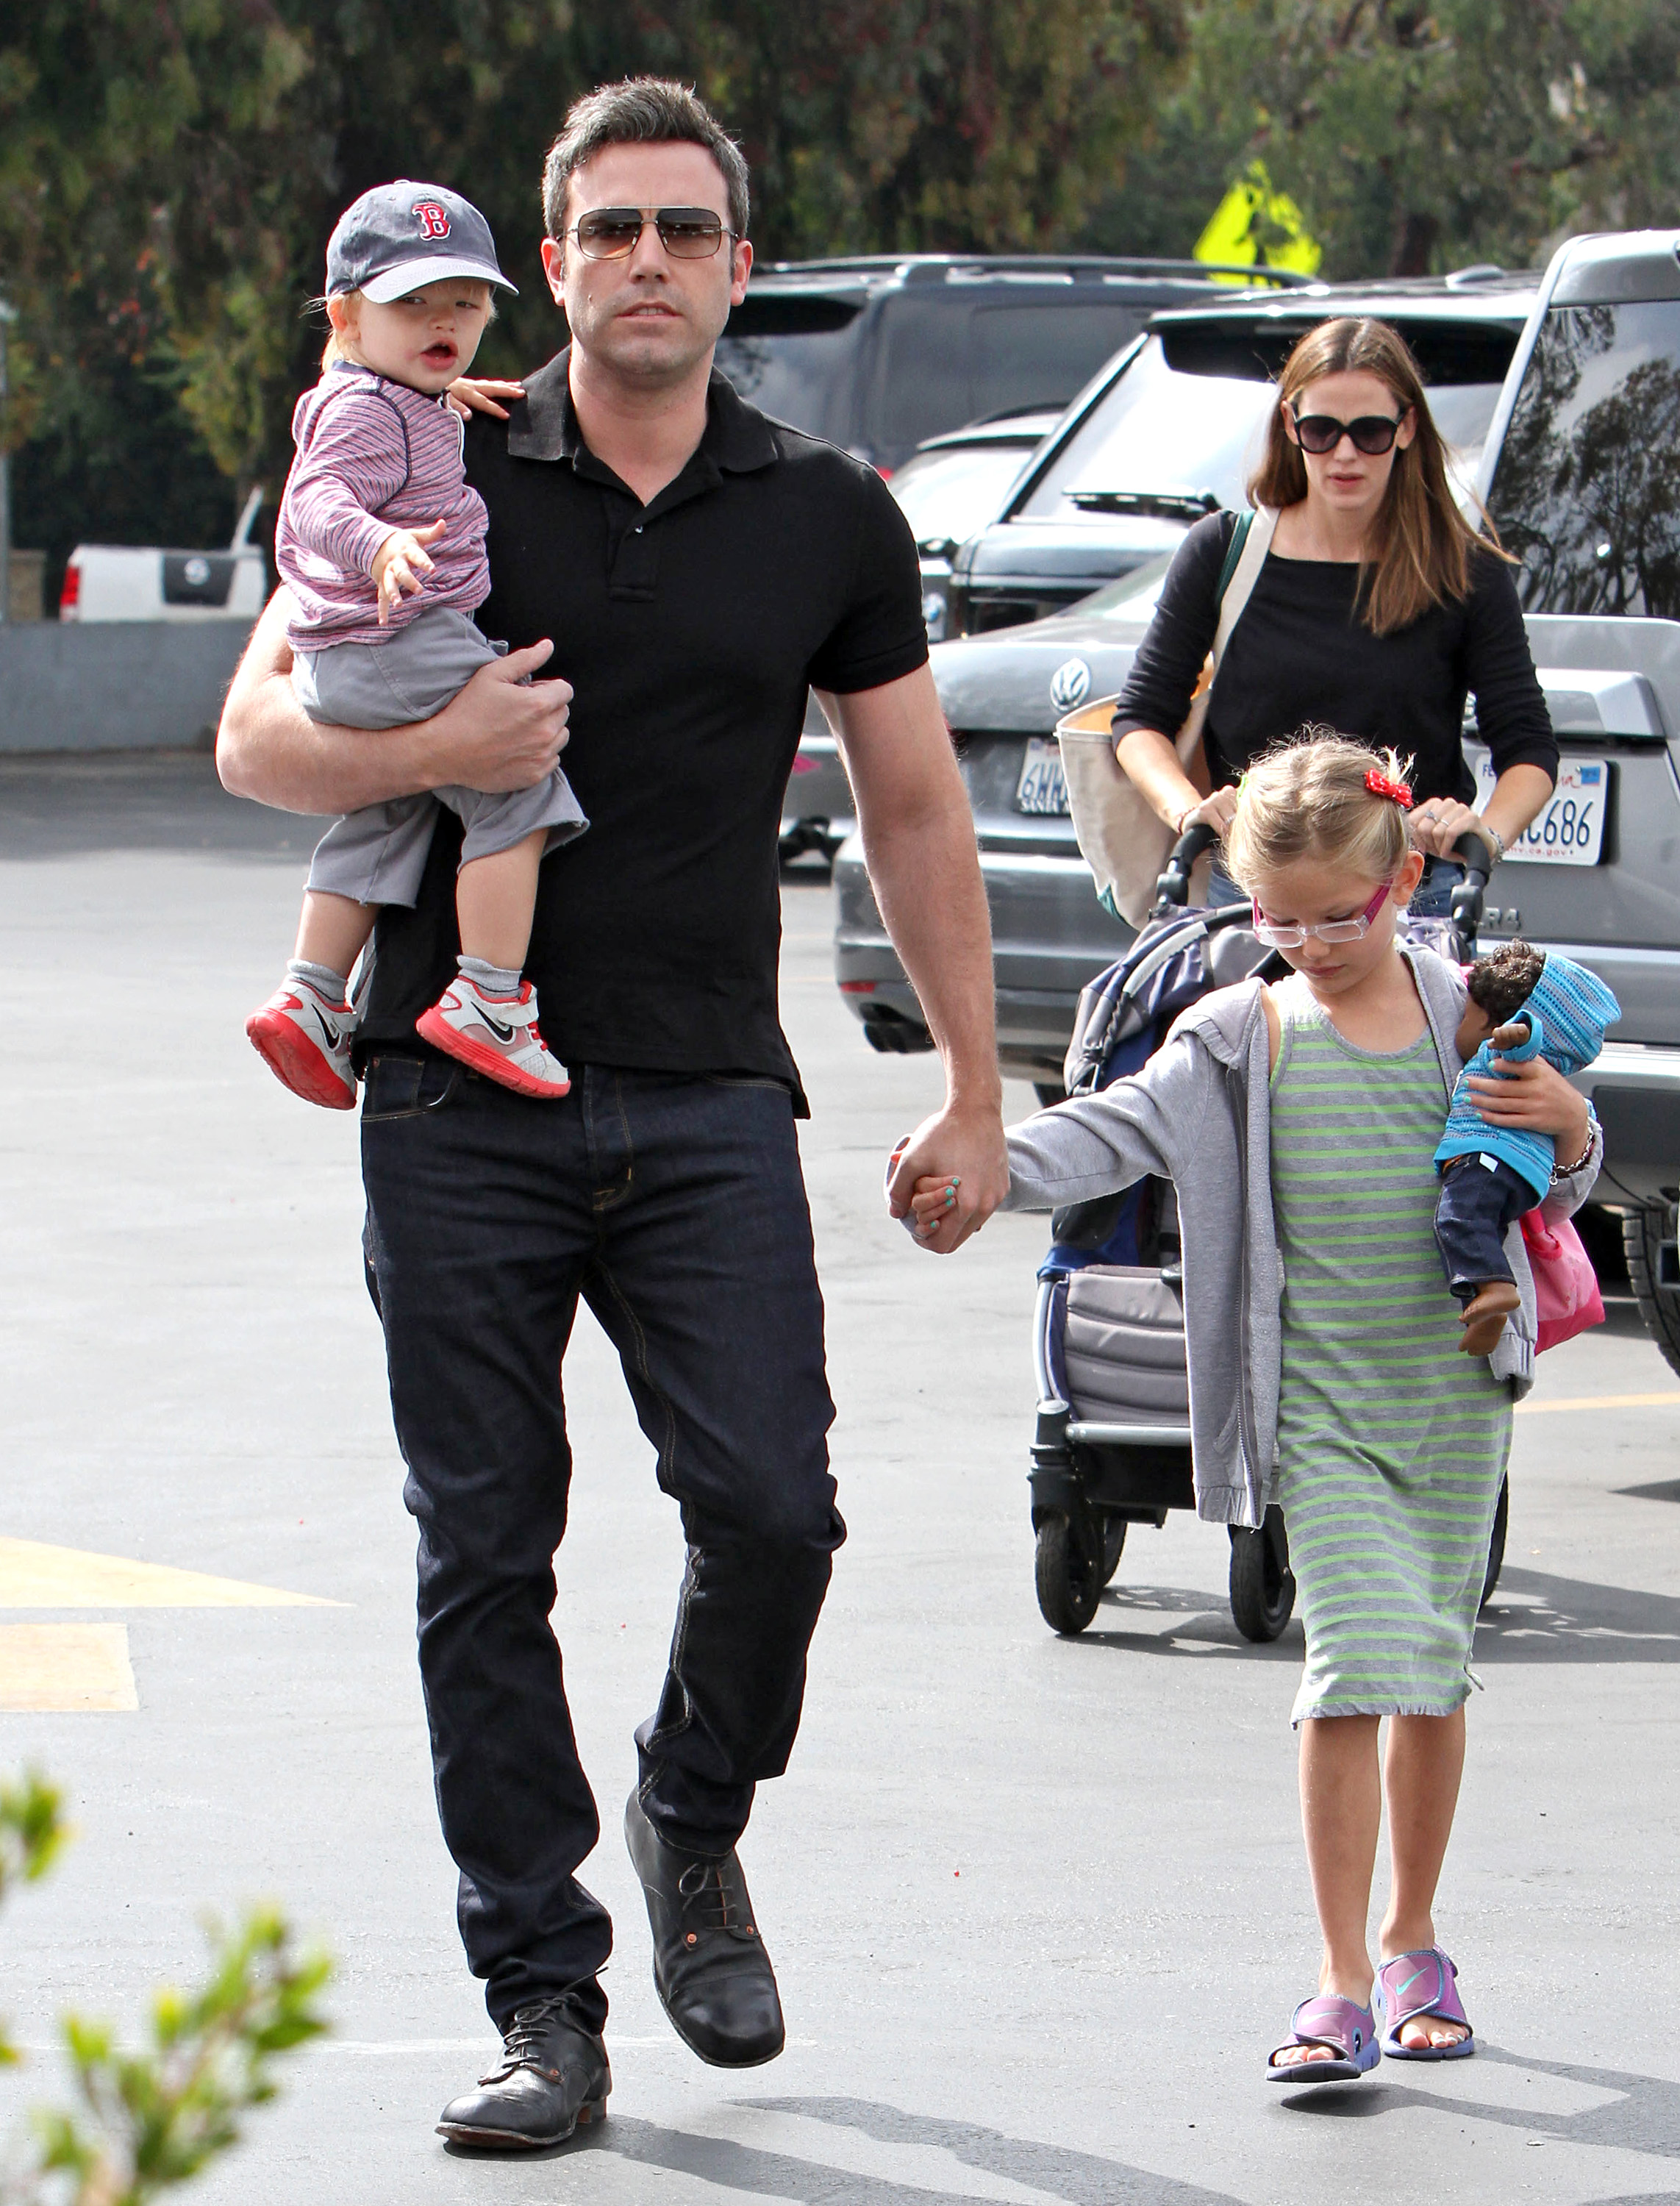 Ben Affleck and Jennifer Garner spotted with their children Violet and Samuel in Los Angeles, California on August 11, 2013 | Source: Getty Images